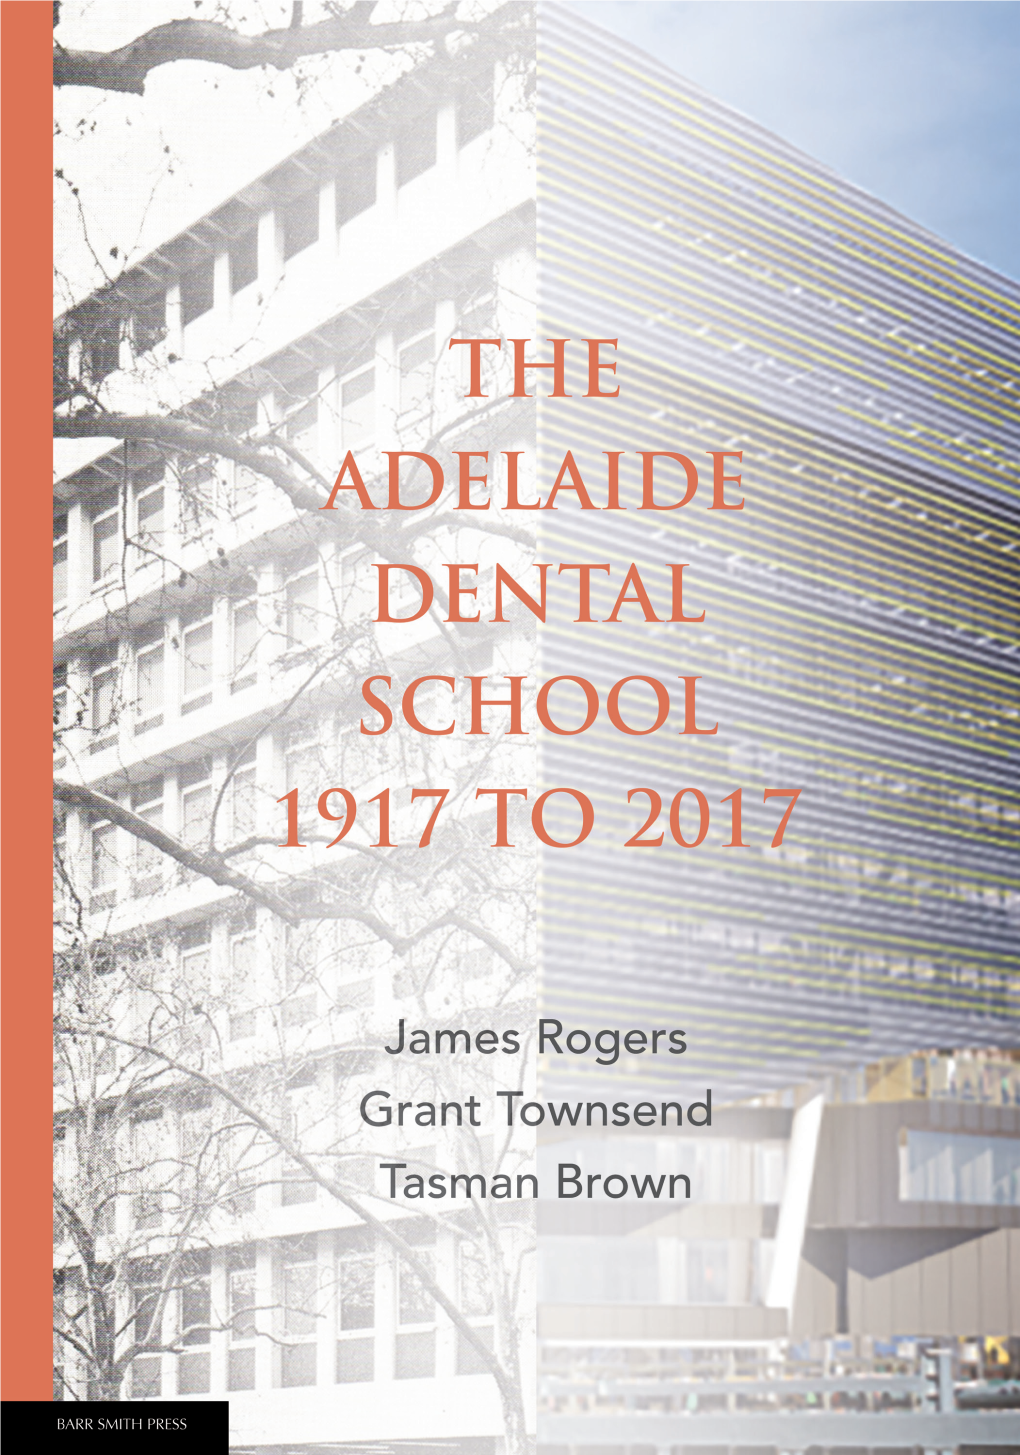 THE ADELAIDE DENTAL SCHOOL 1917 to 2017 Share This Book